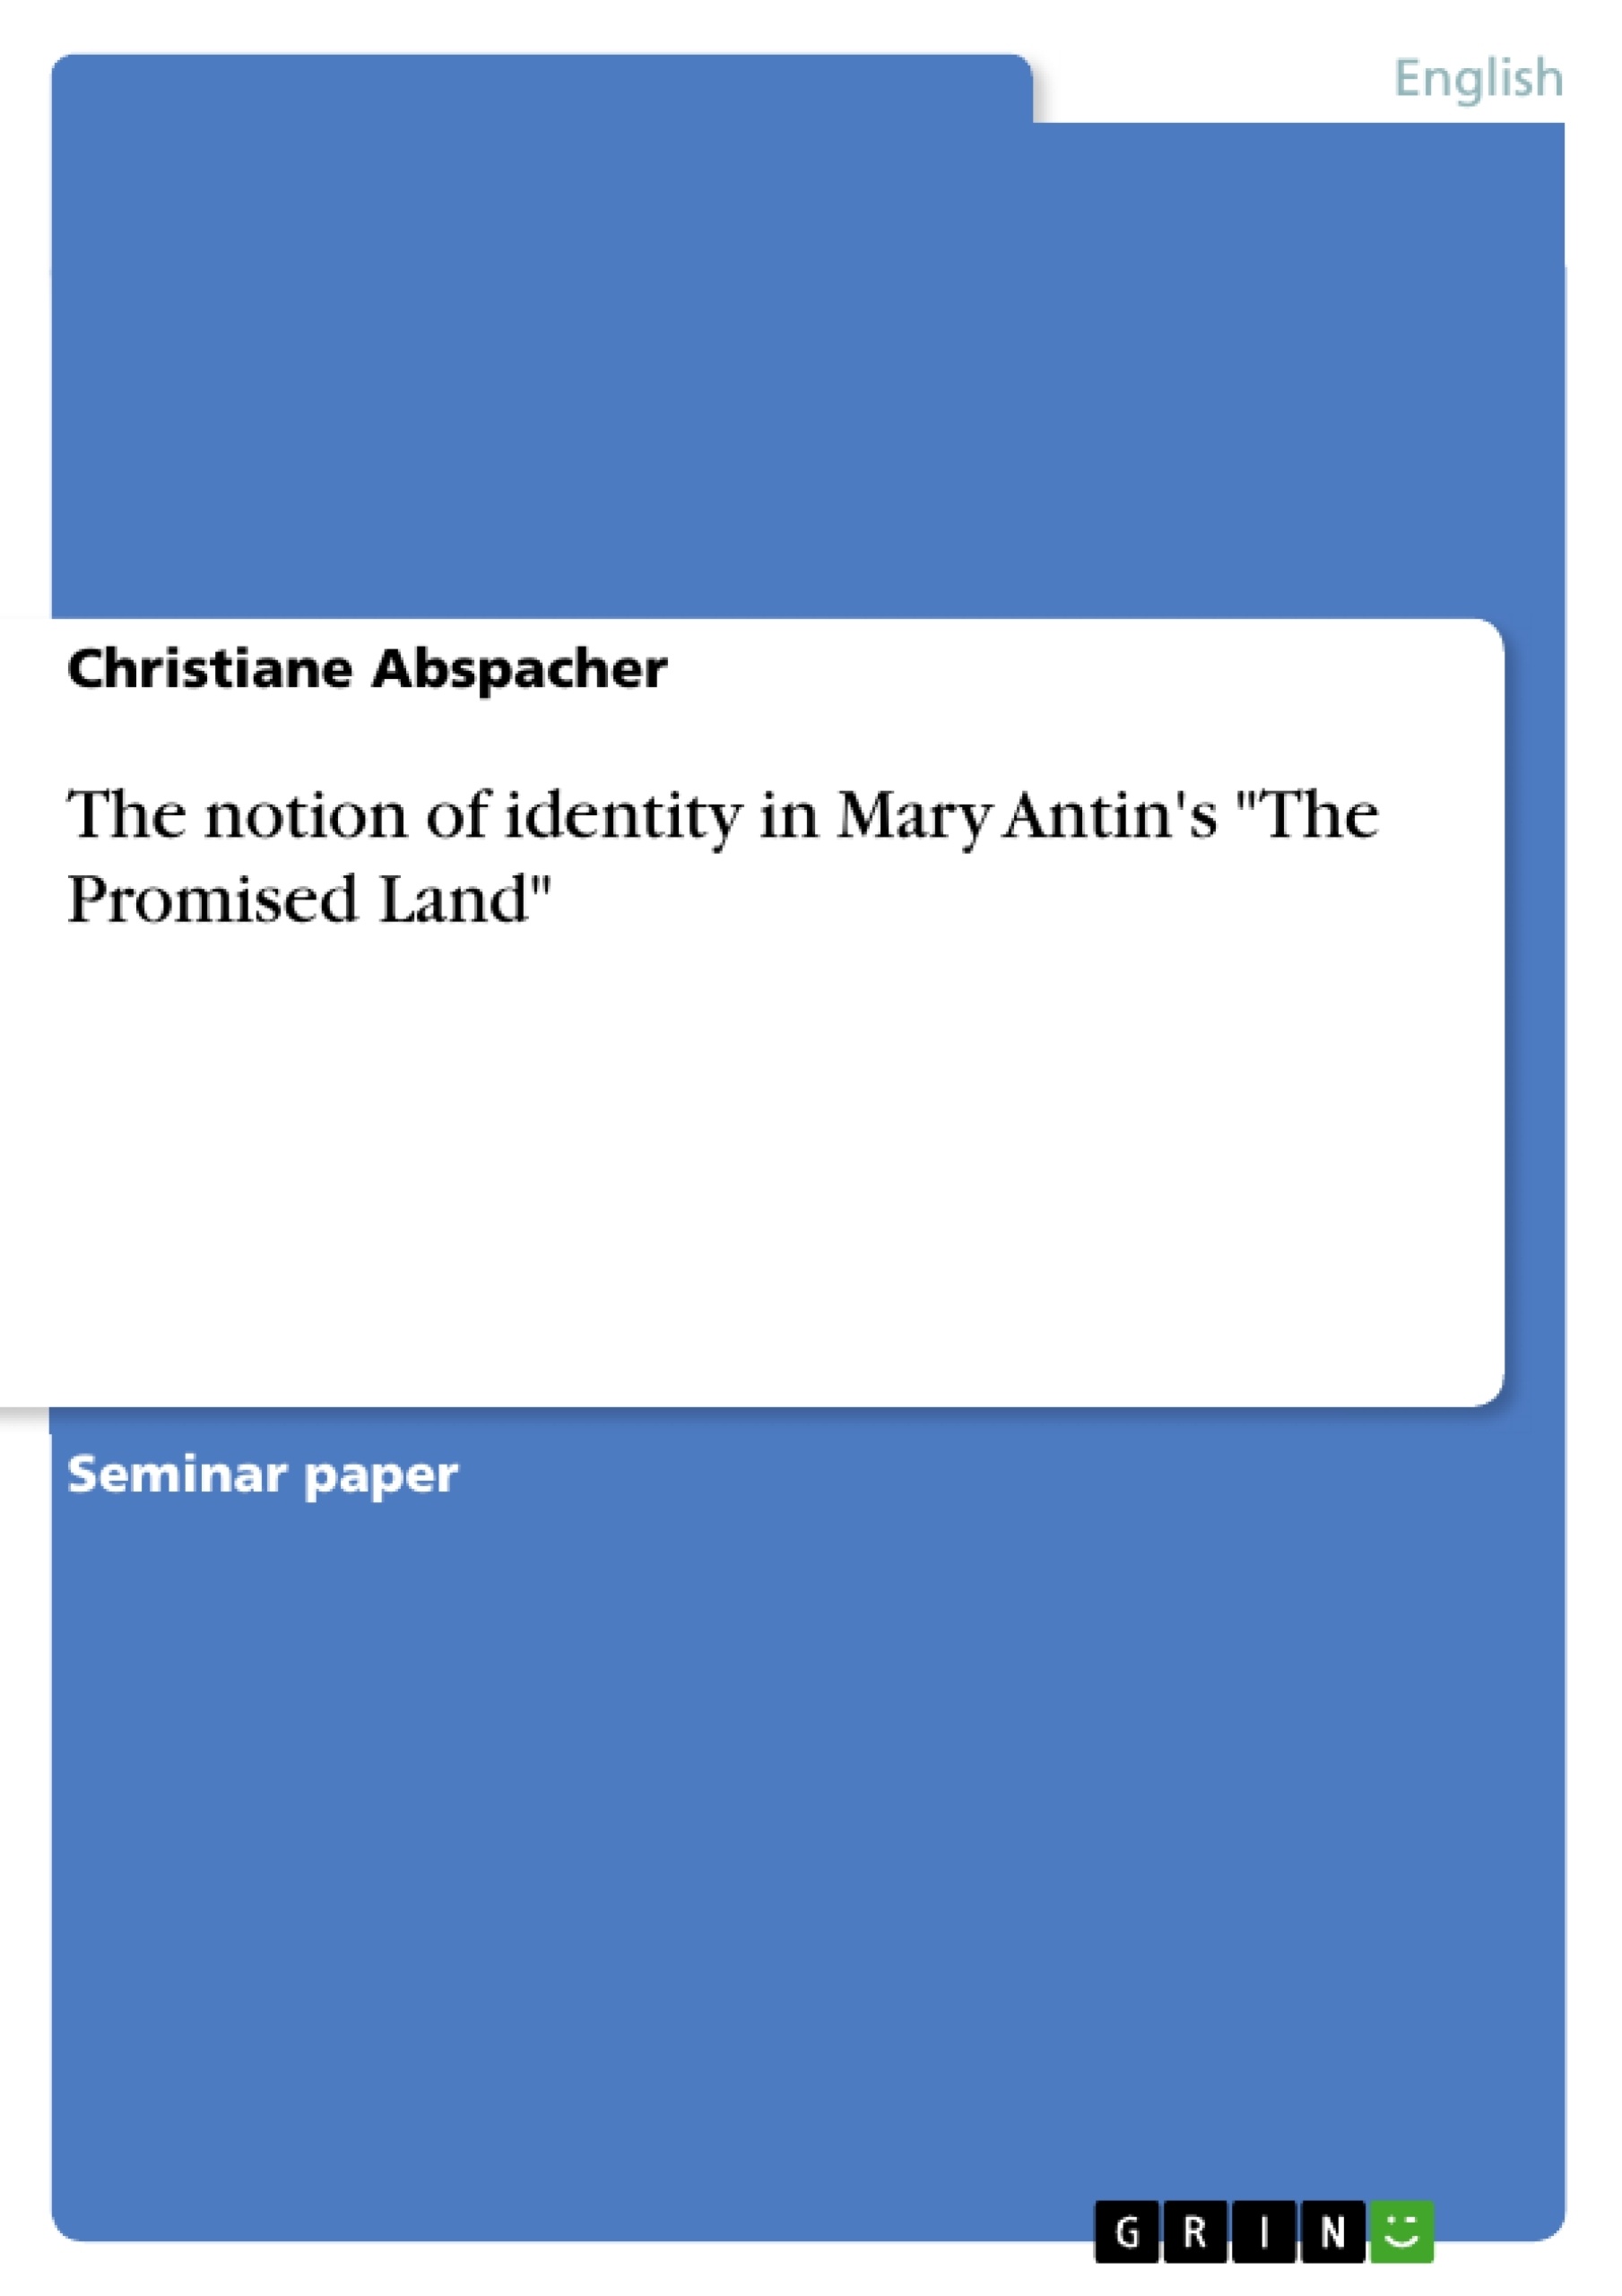 Title: The notion of identity in Mary Antin's "The Promised Land"